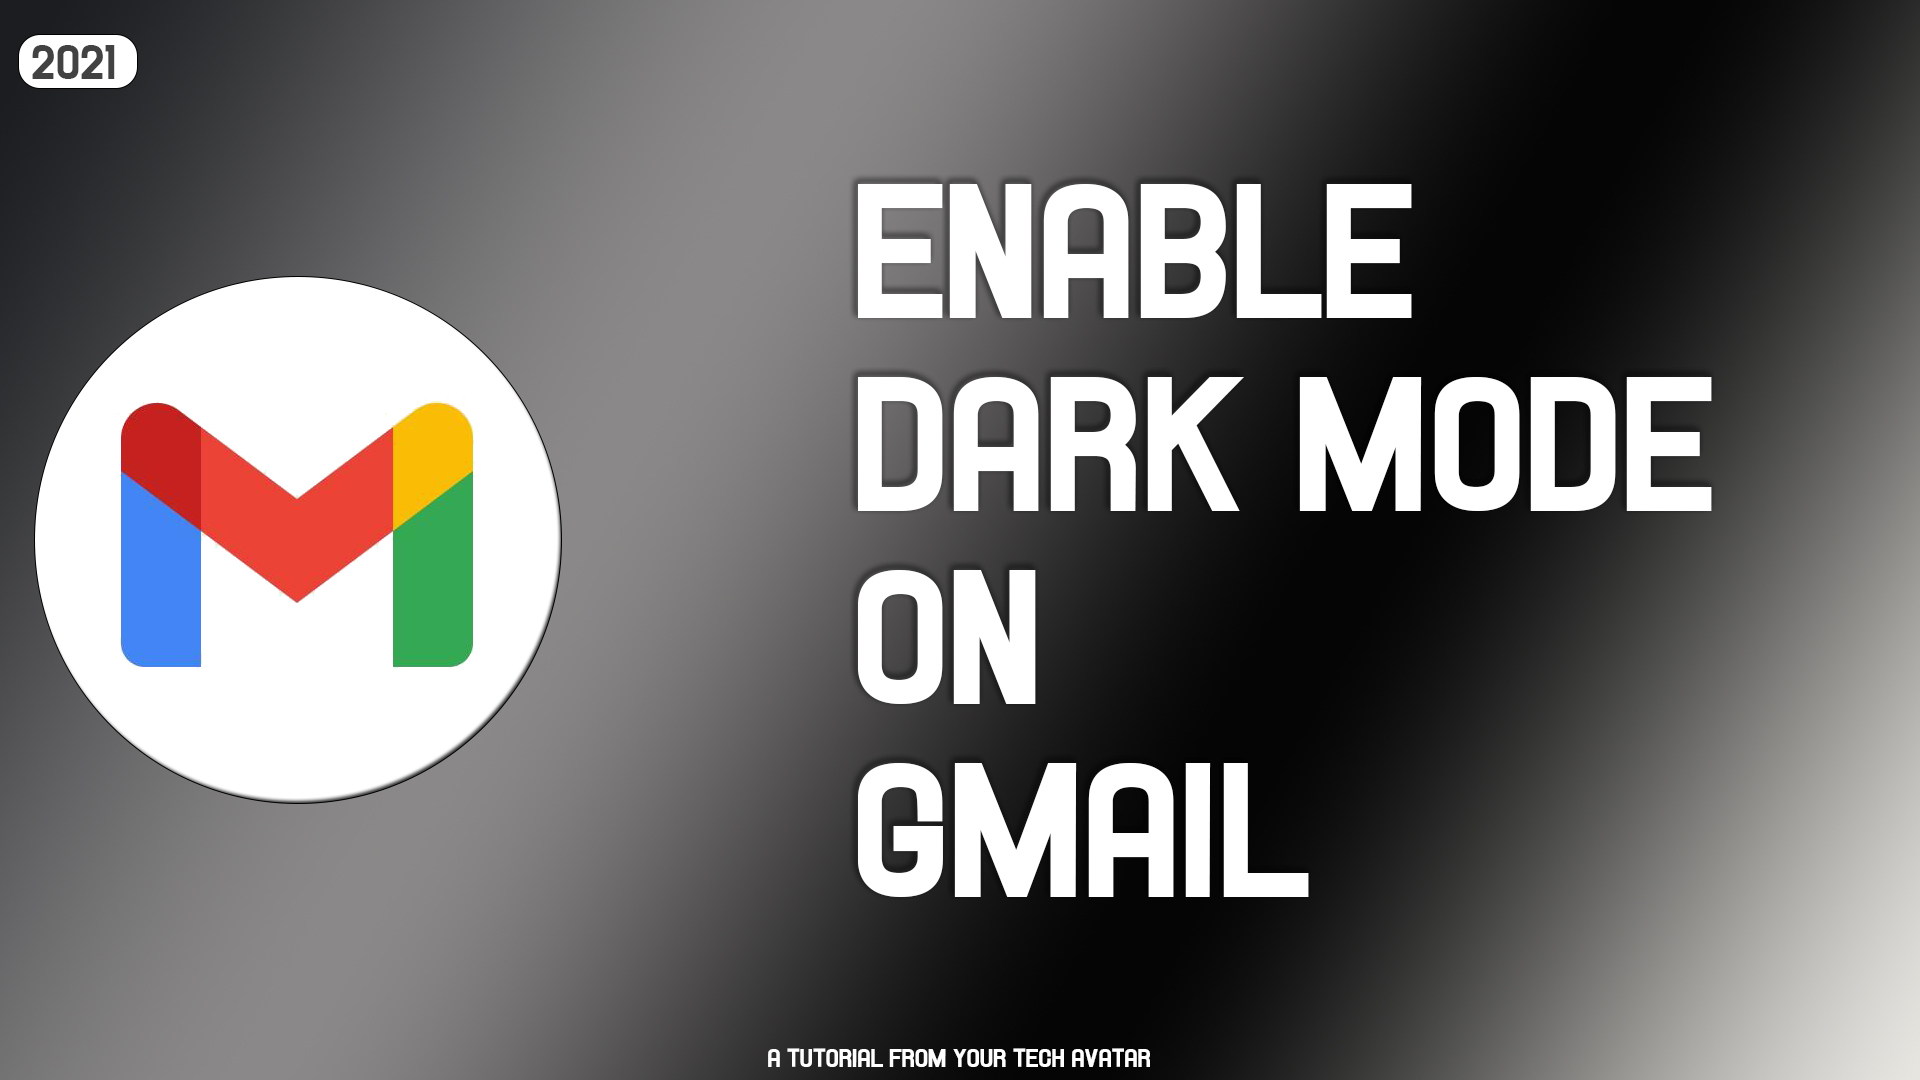 How to enable dark mode on Gmail